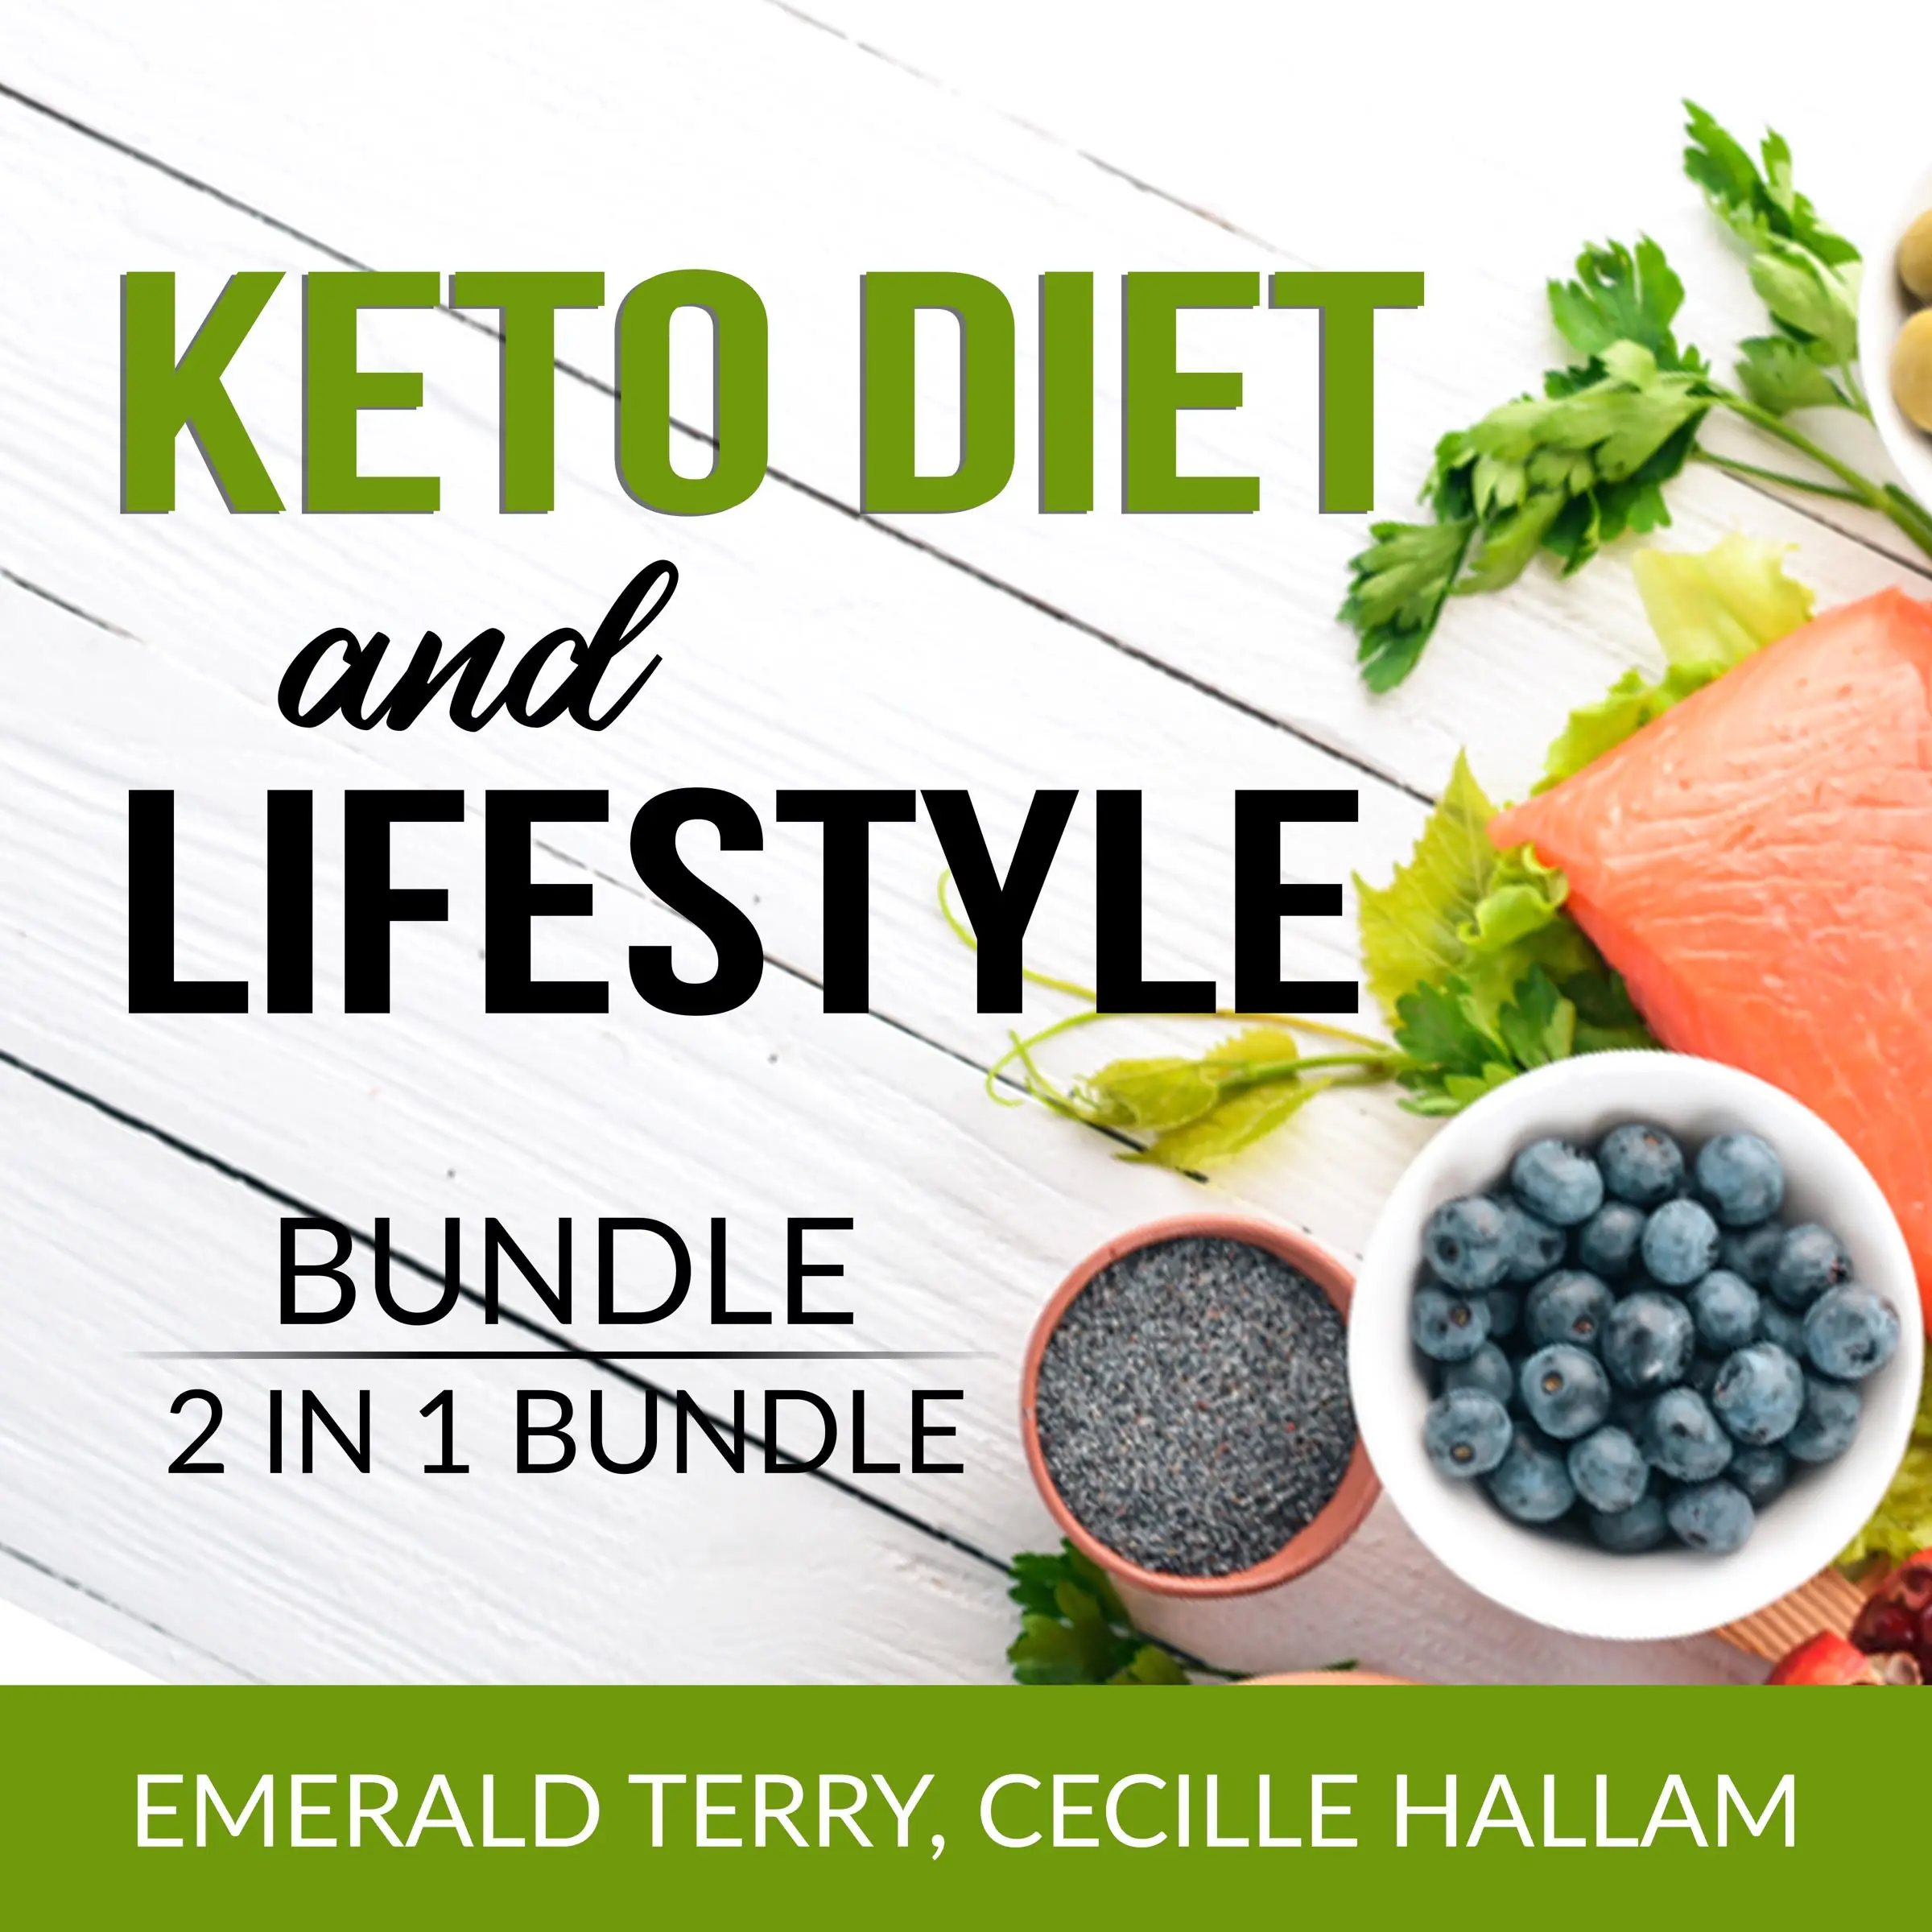 Keto Diet and Lifestyle Bundle, 2 in 1 Bundle: Ketogenic Eating and Clean Keto Lifestyle Audiobook by and Cecille Hallam